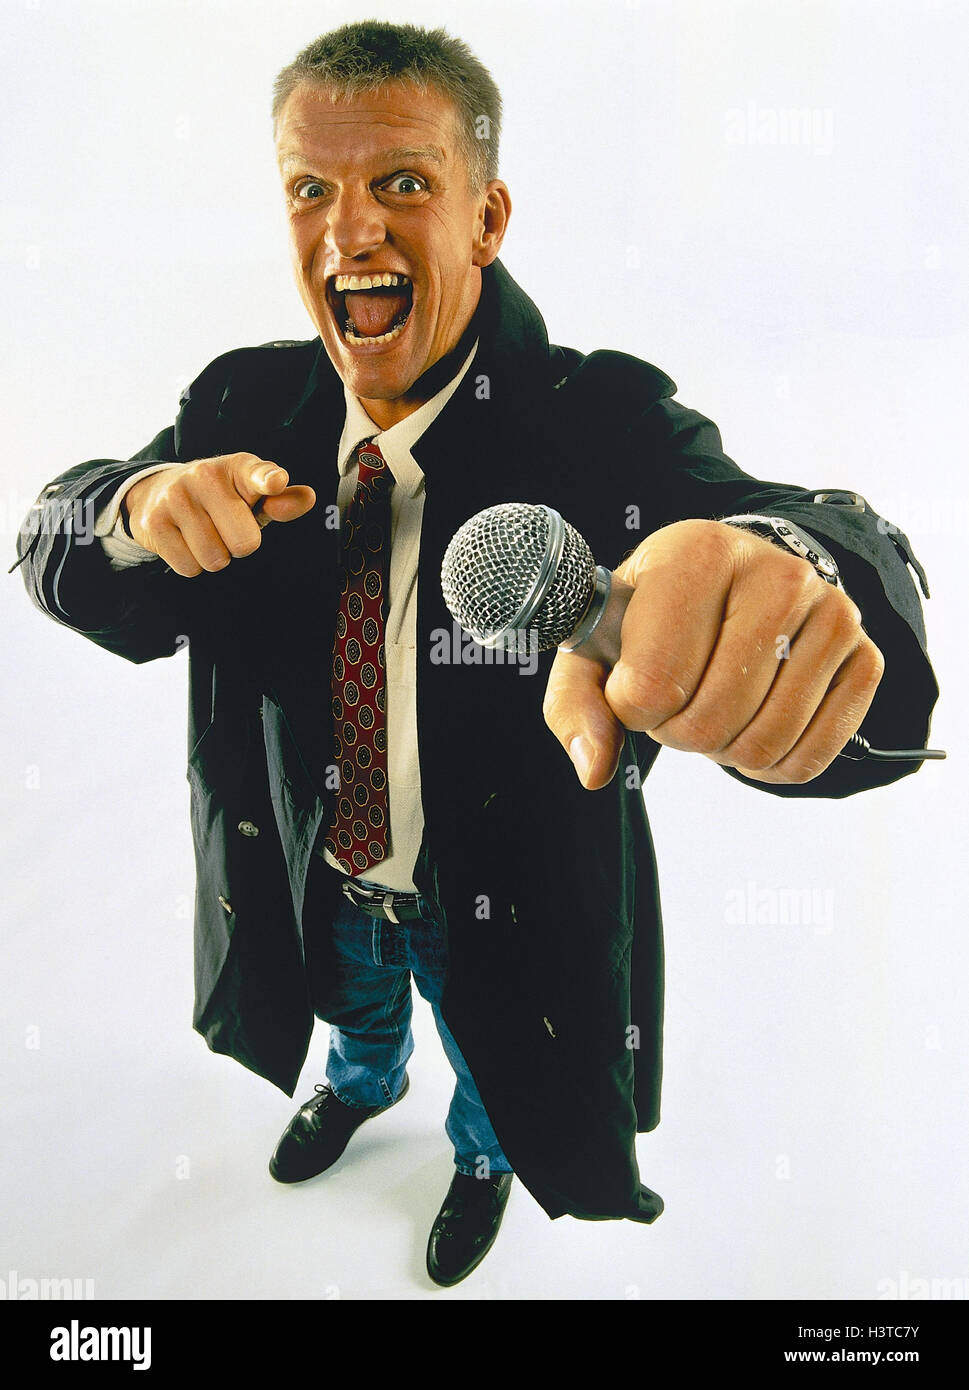 Reporters, microphone, interview, gesture, man, facial play, shout, loudly, volume, excessively, enthusiasm, occupation, media, press, press work Stock Photo